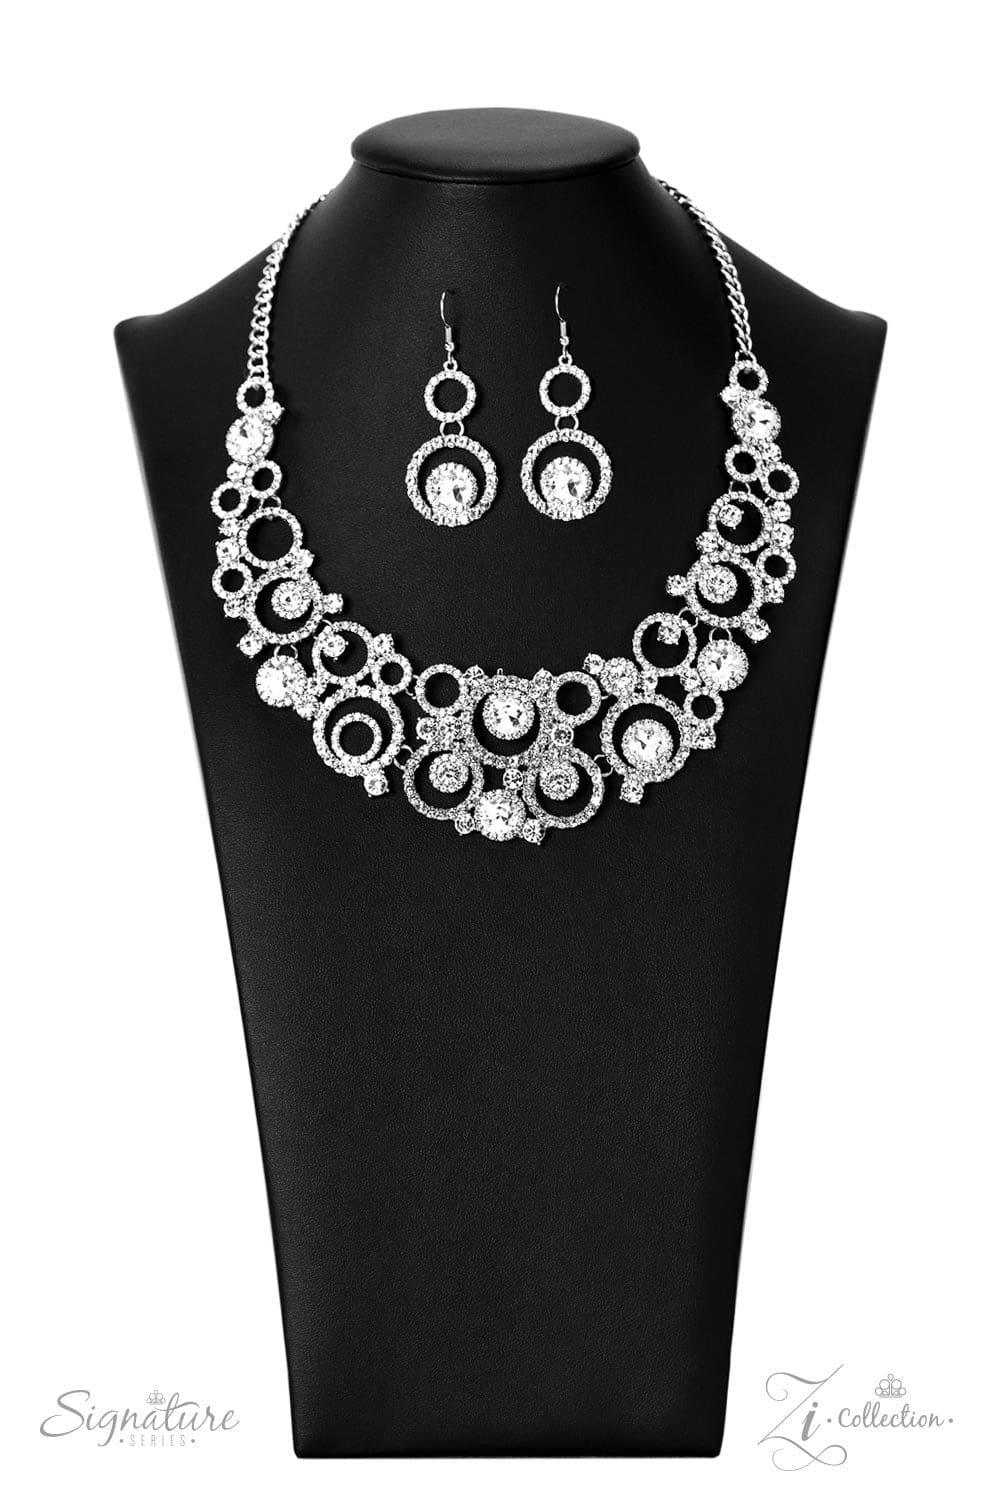 Paparazzi Accessories - The Jennifer - 2022 Signature Zi Collection Necklace - Bling by JessieK